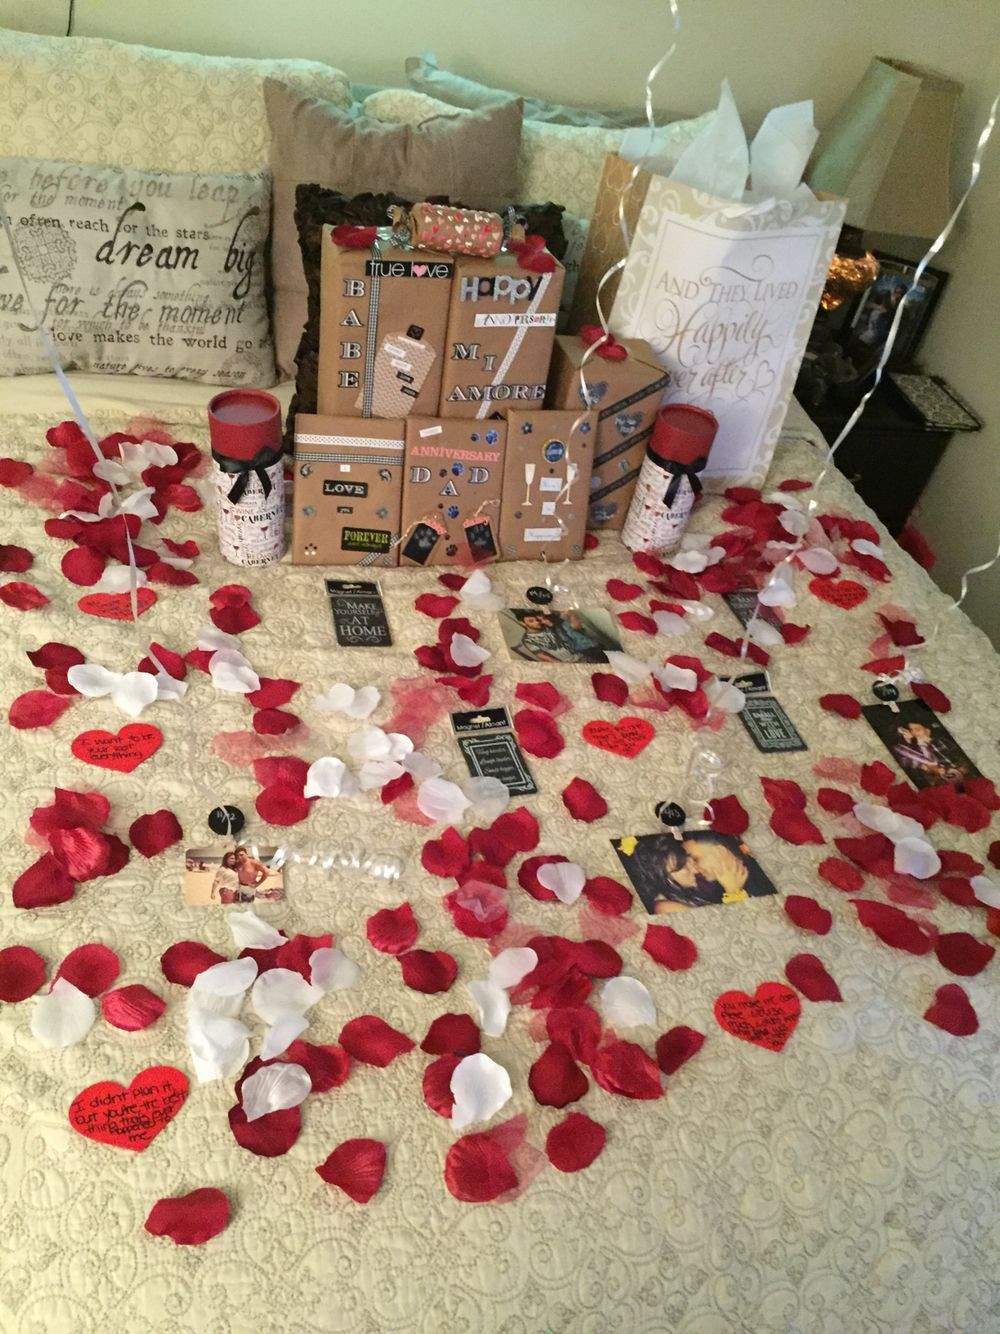 Valentines Gift Ideas For Boyfriend Yahoo
 Pin on My crafty ways I ve done to share ideas